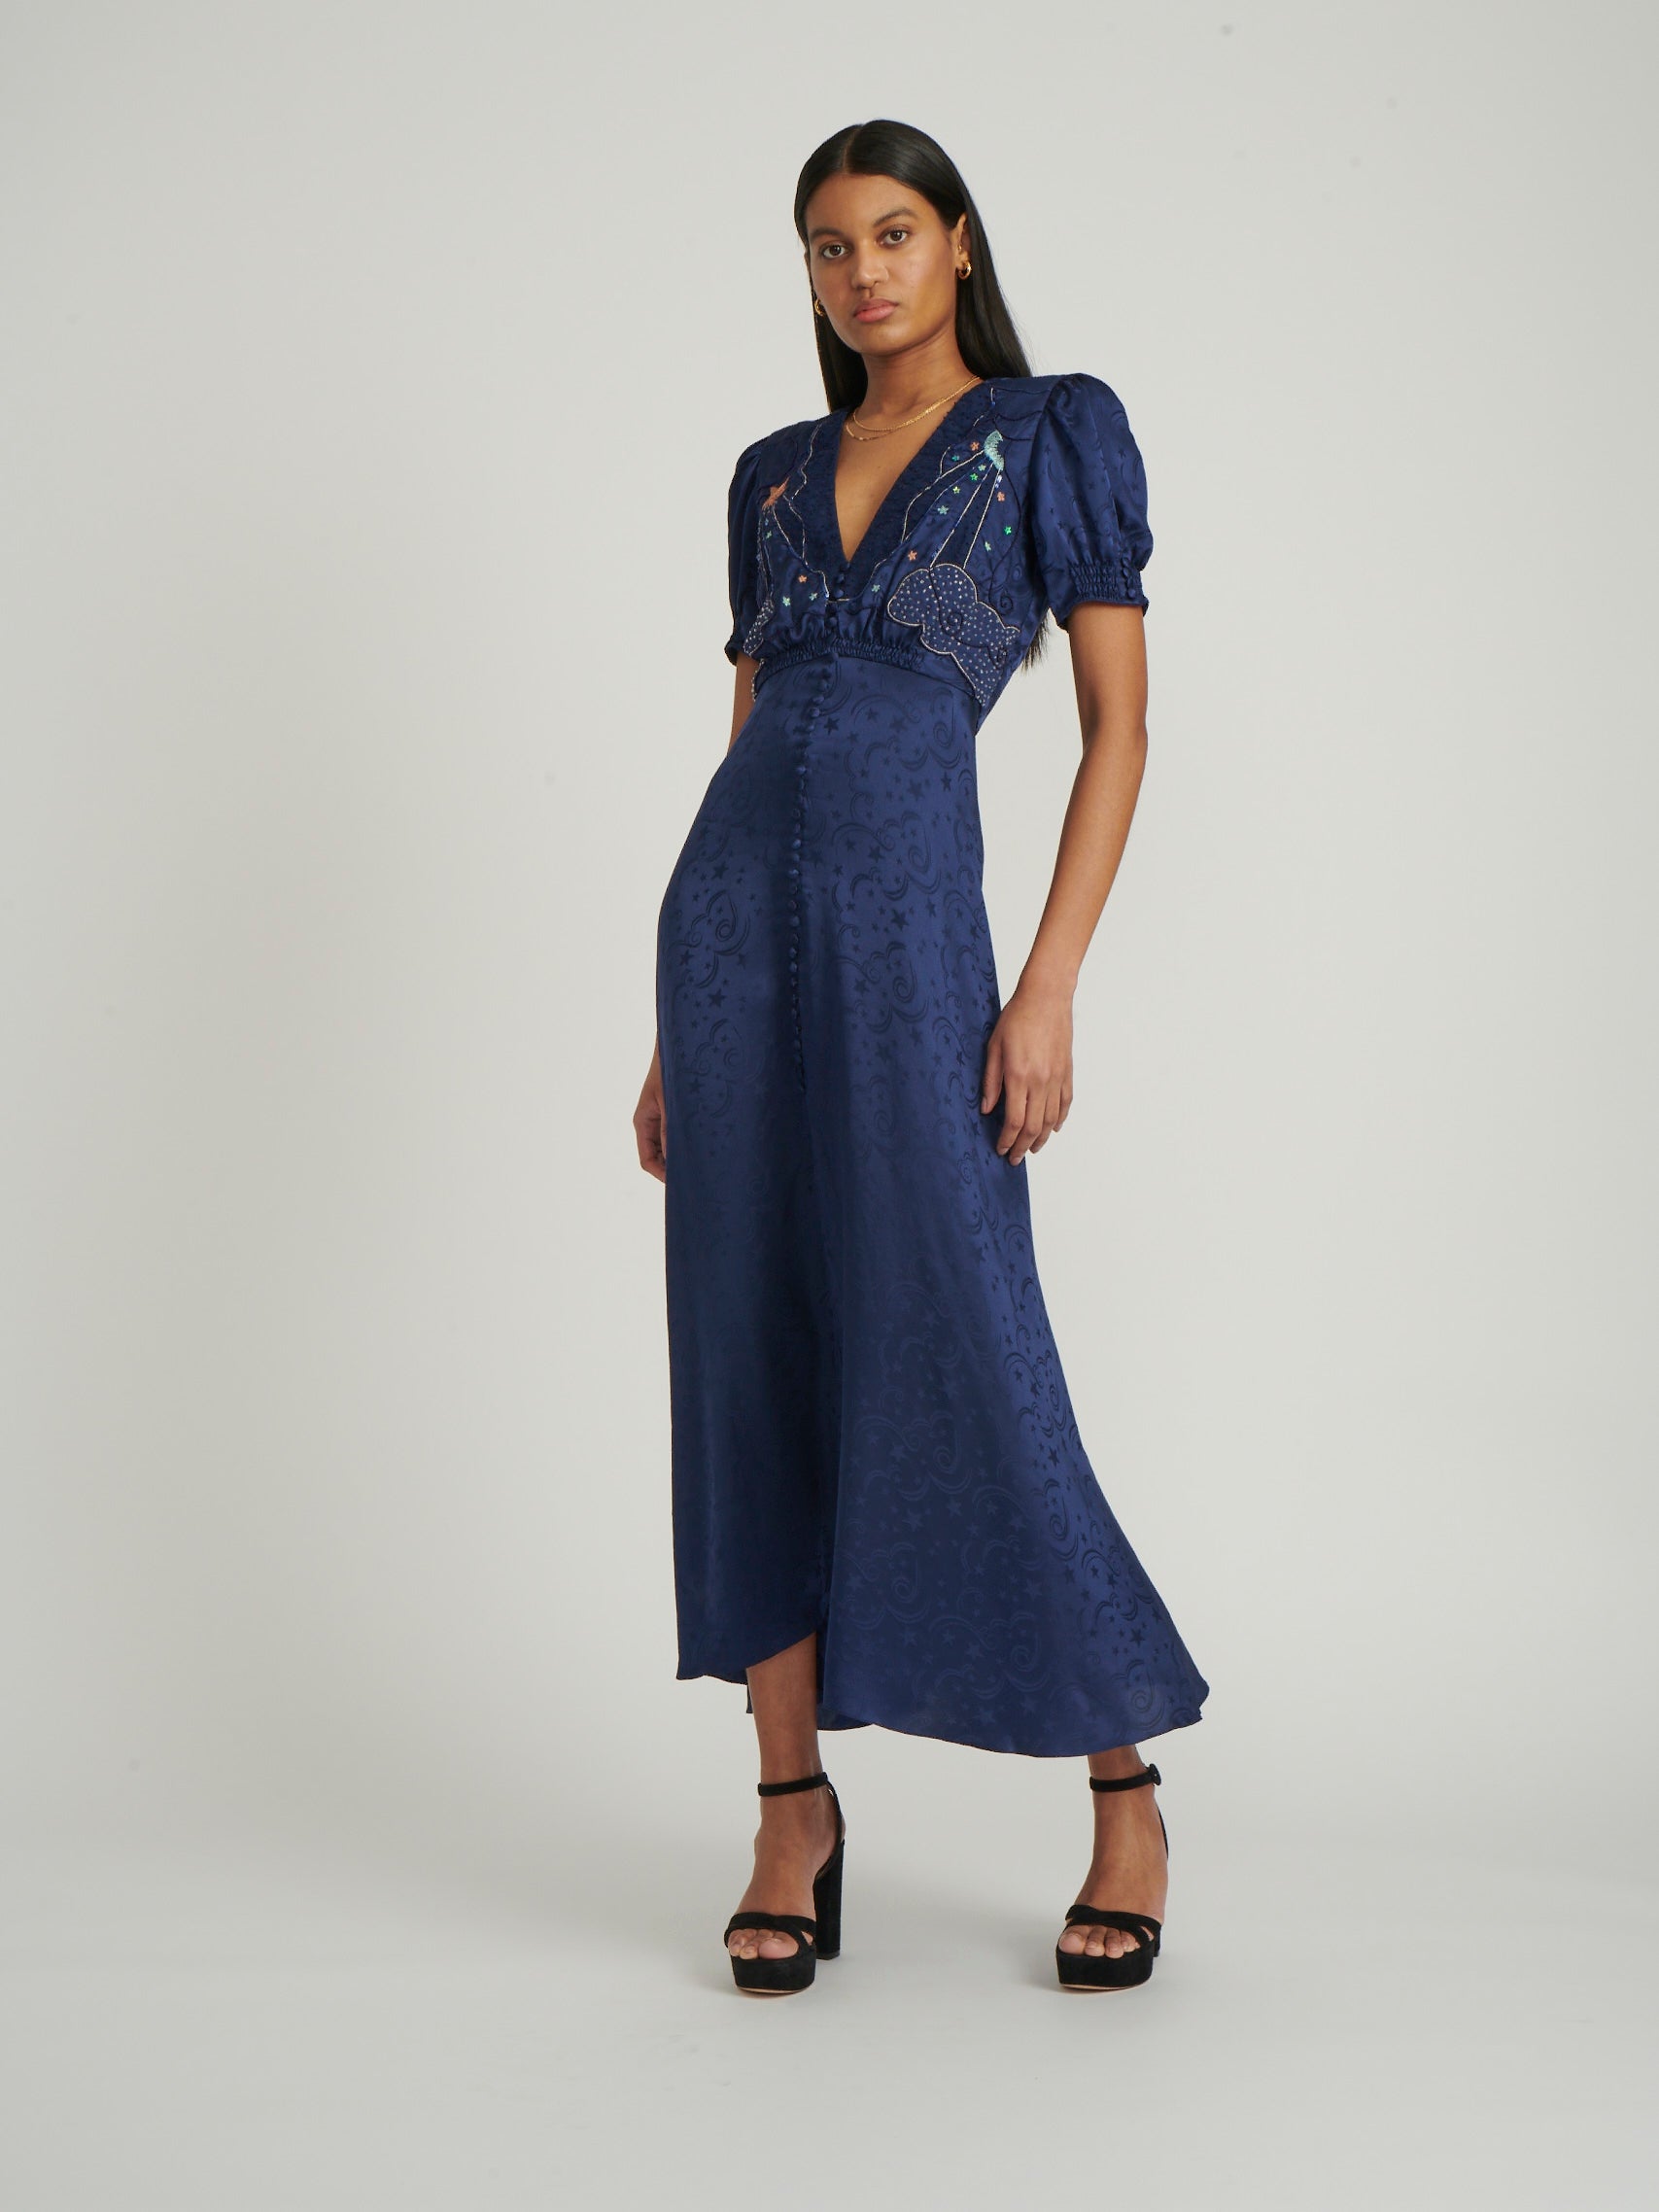 Venyx Lea Long Dress in Navy Astro Embroidered